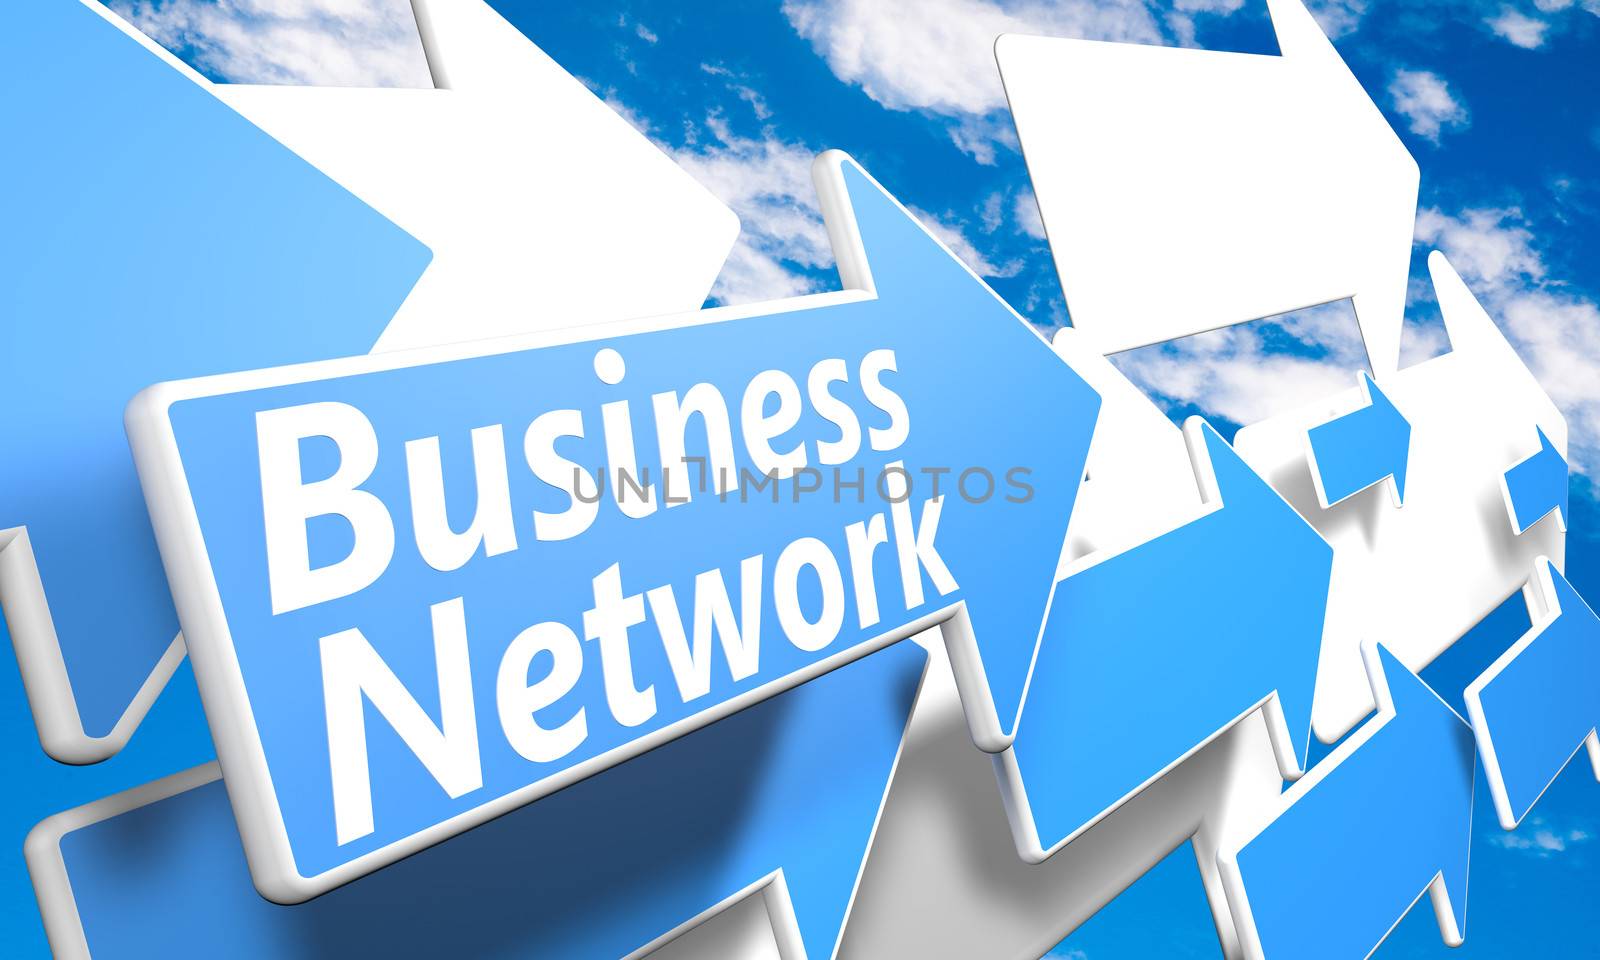 Business Network 3d render concept with blue and white arrows flying in a blue sky with clouds